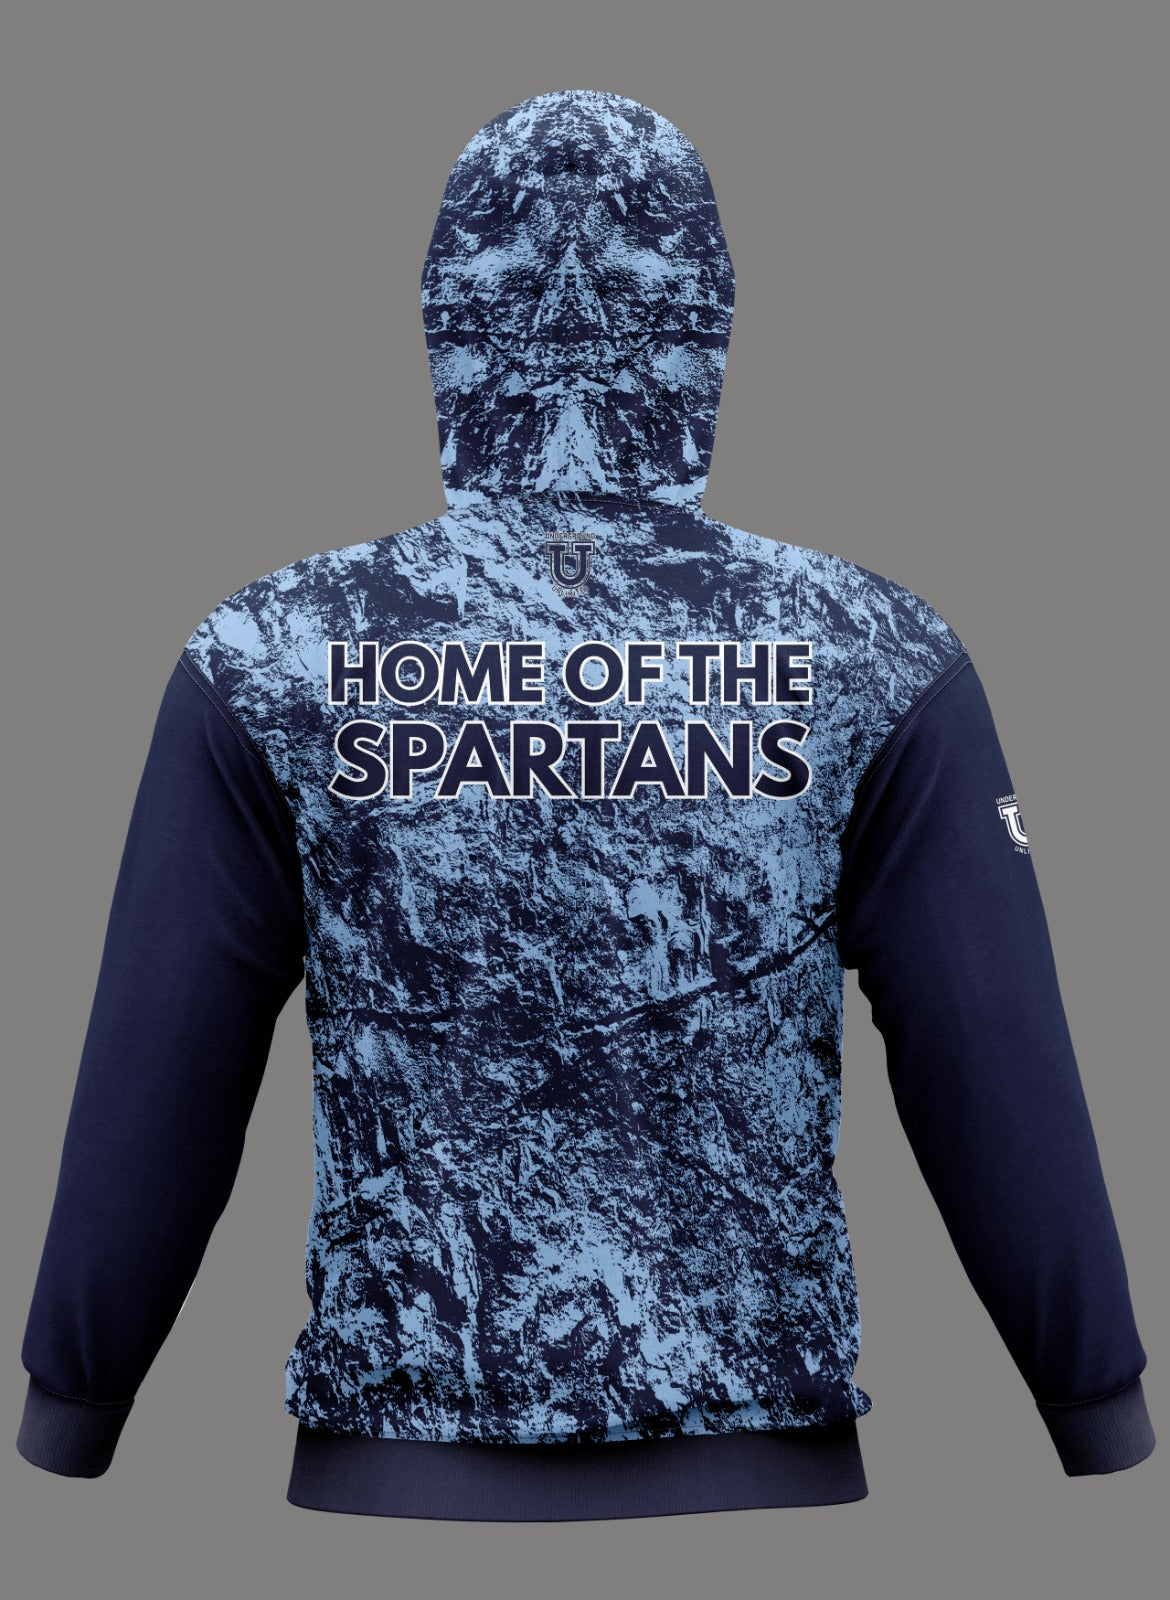 W.T. Chipman Performance Hoodie ~ Tie-Dye C Central "Home of the Spartans"